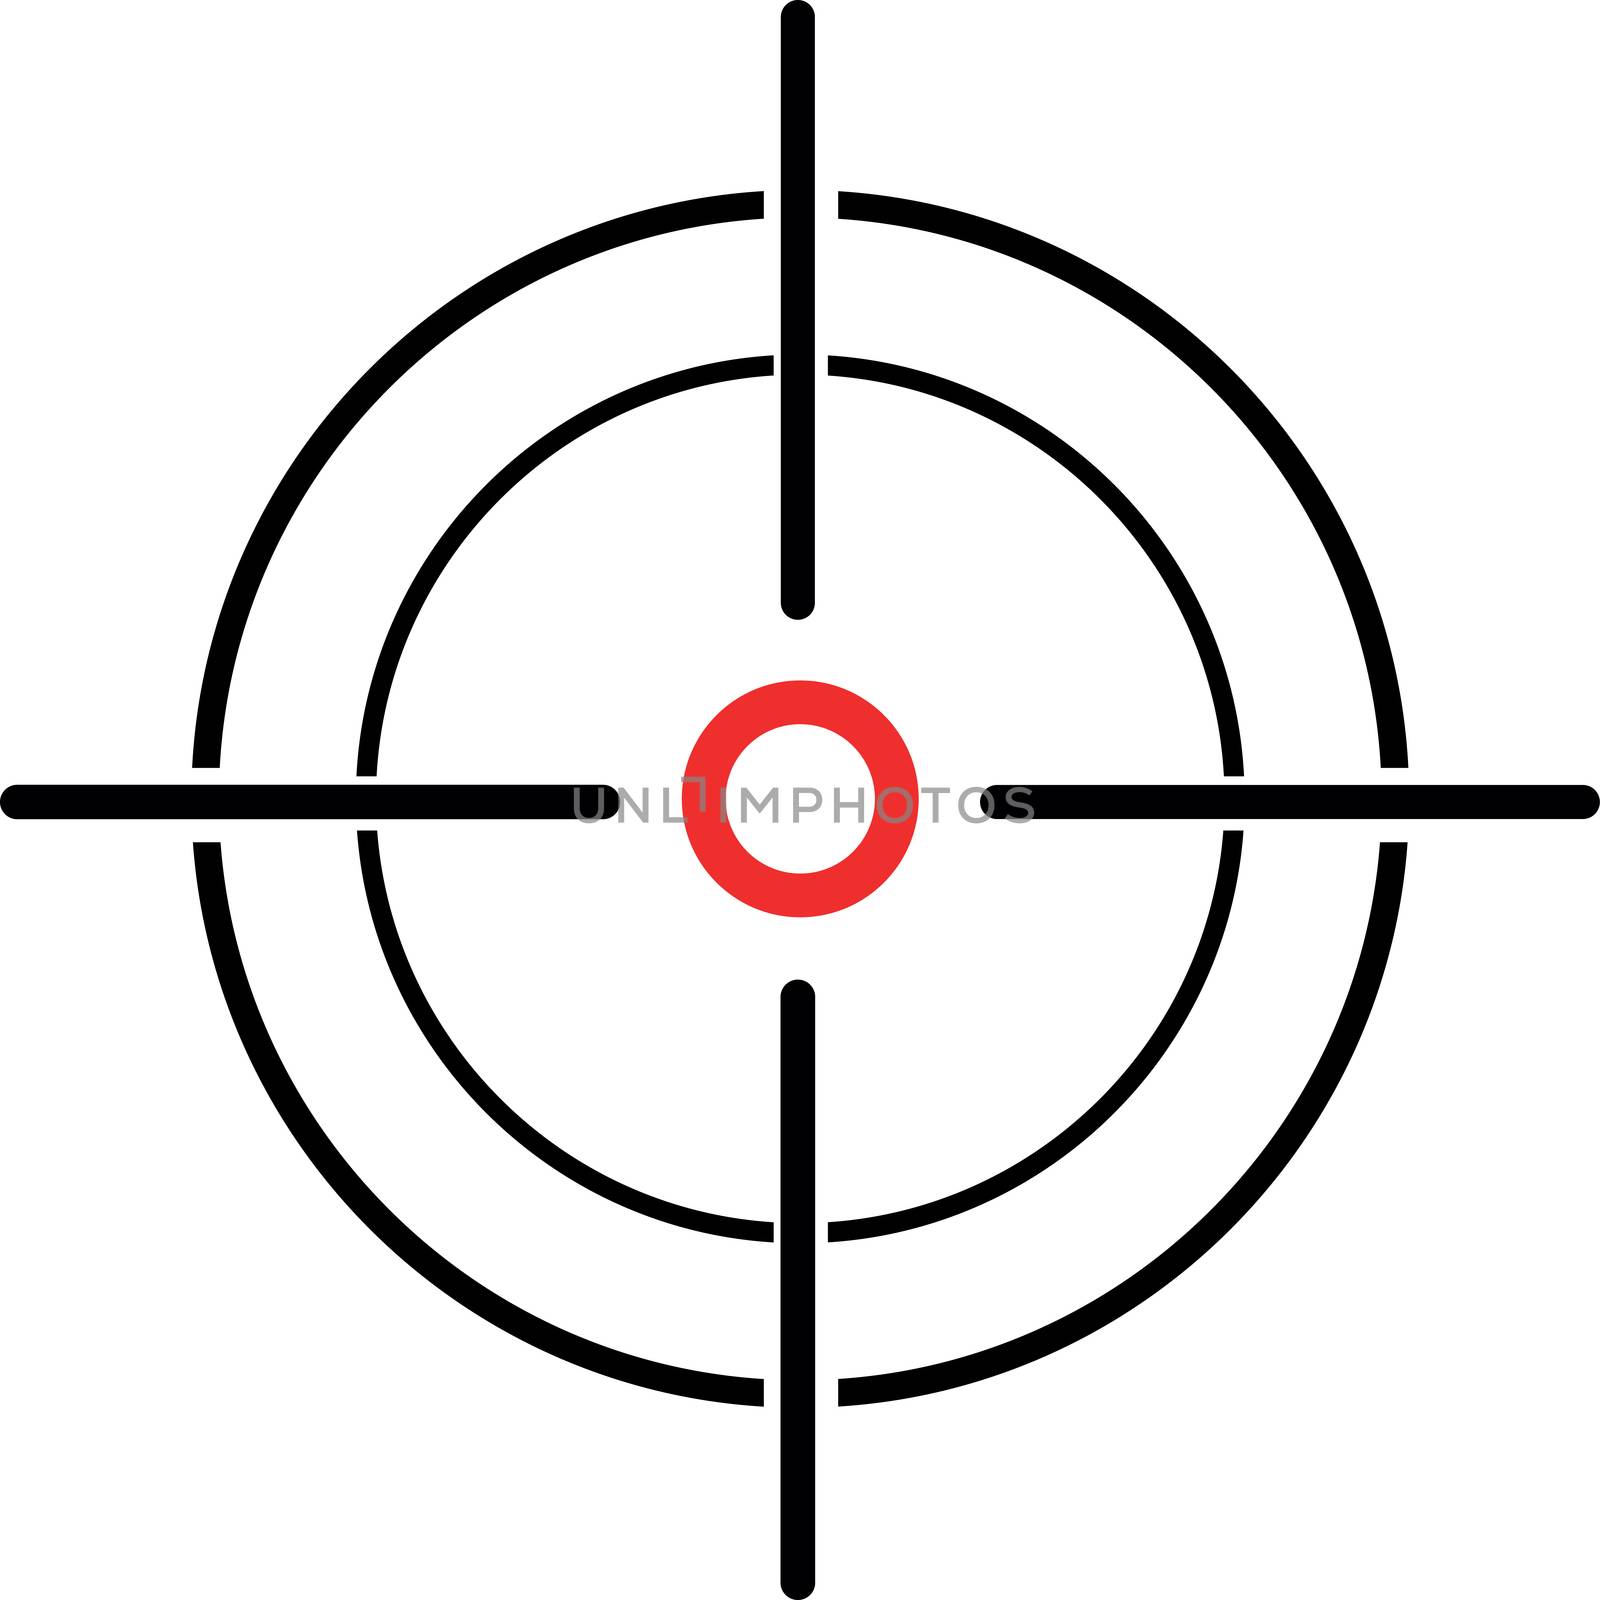 An Illustration of a crosshair reticle on a white background